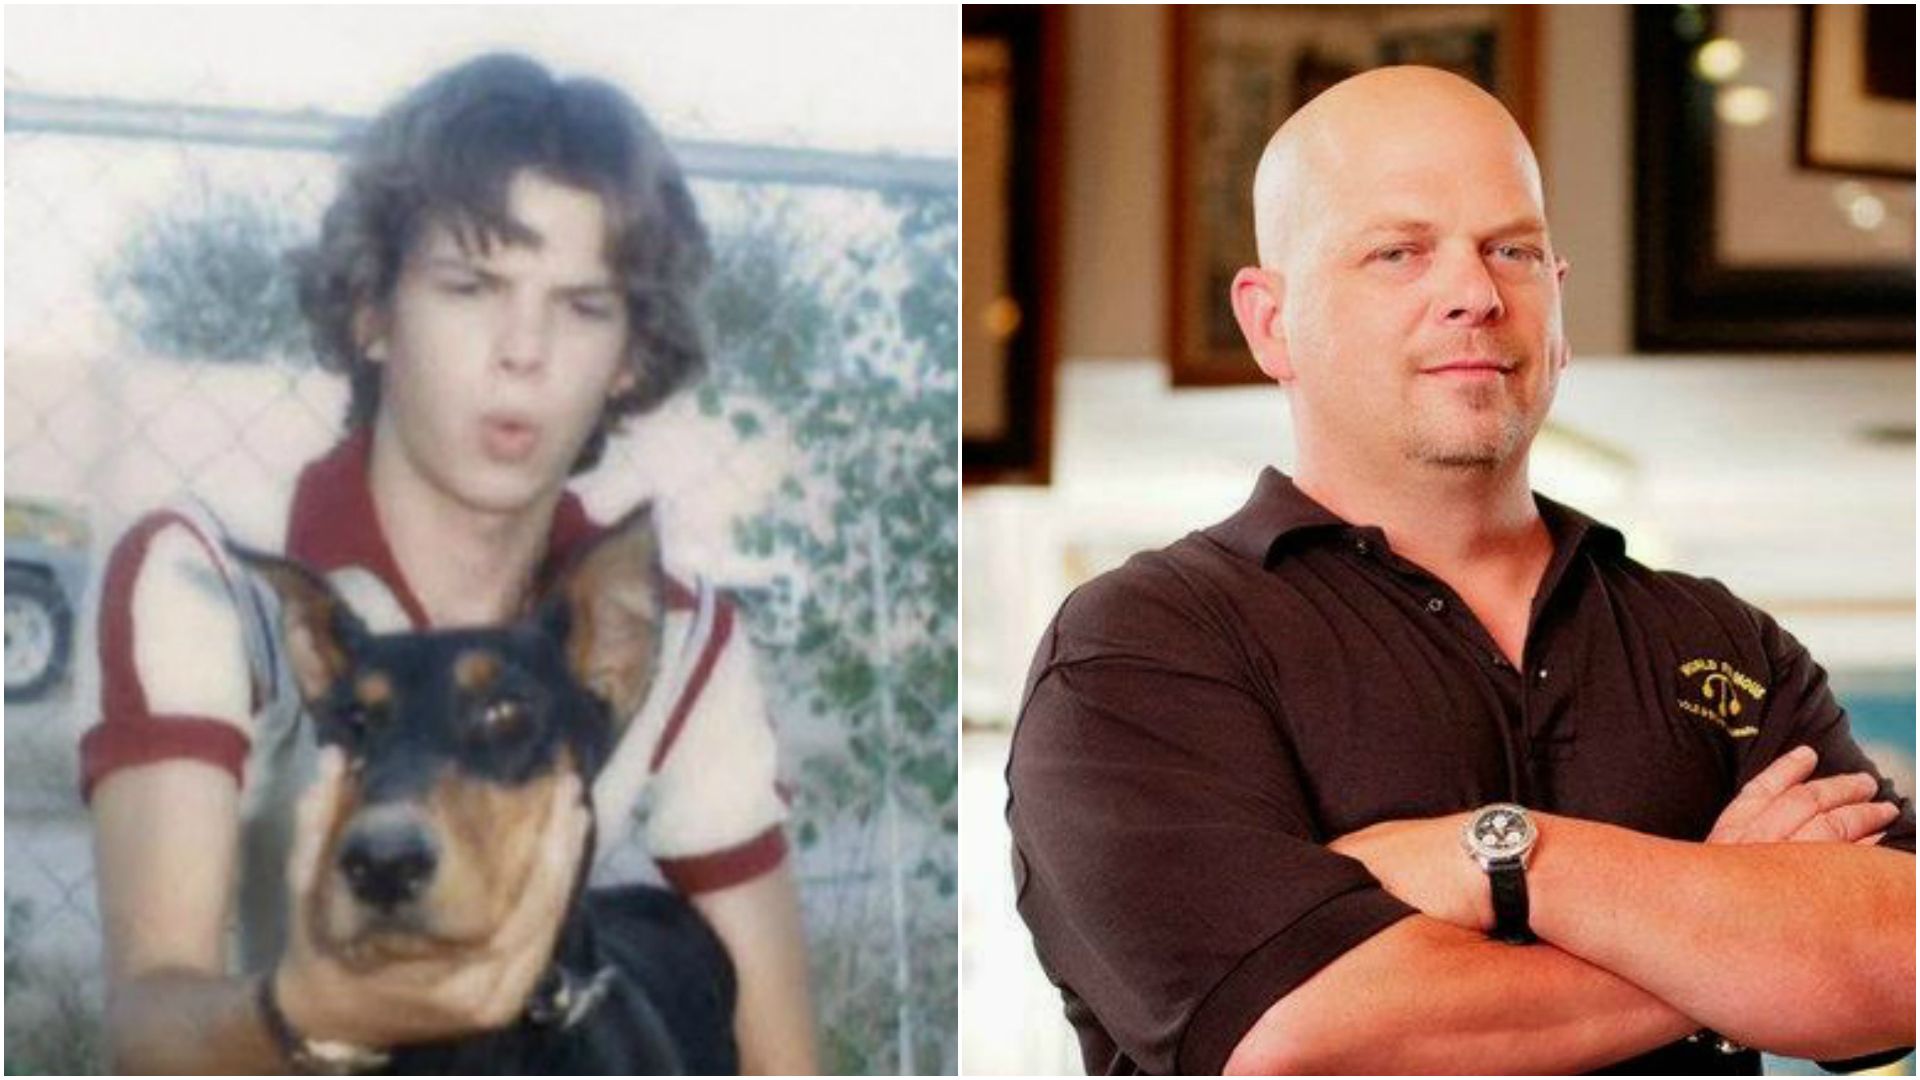 16 Pawn Stars Before They Were Famous